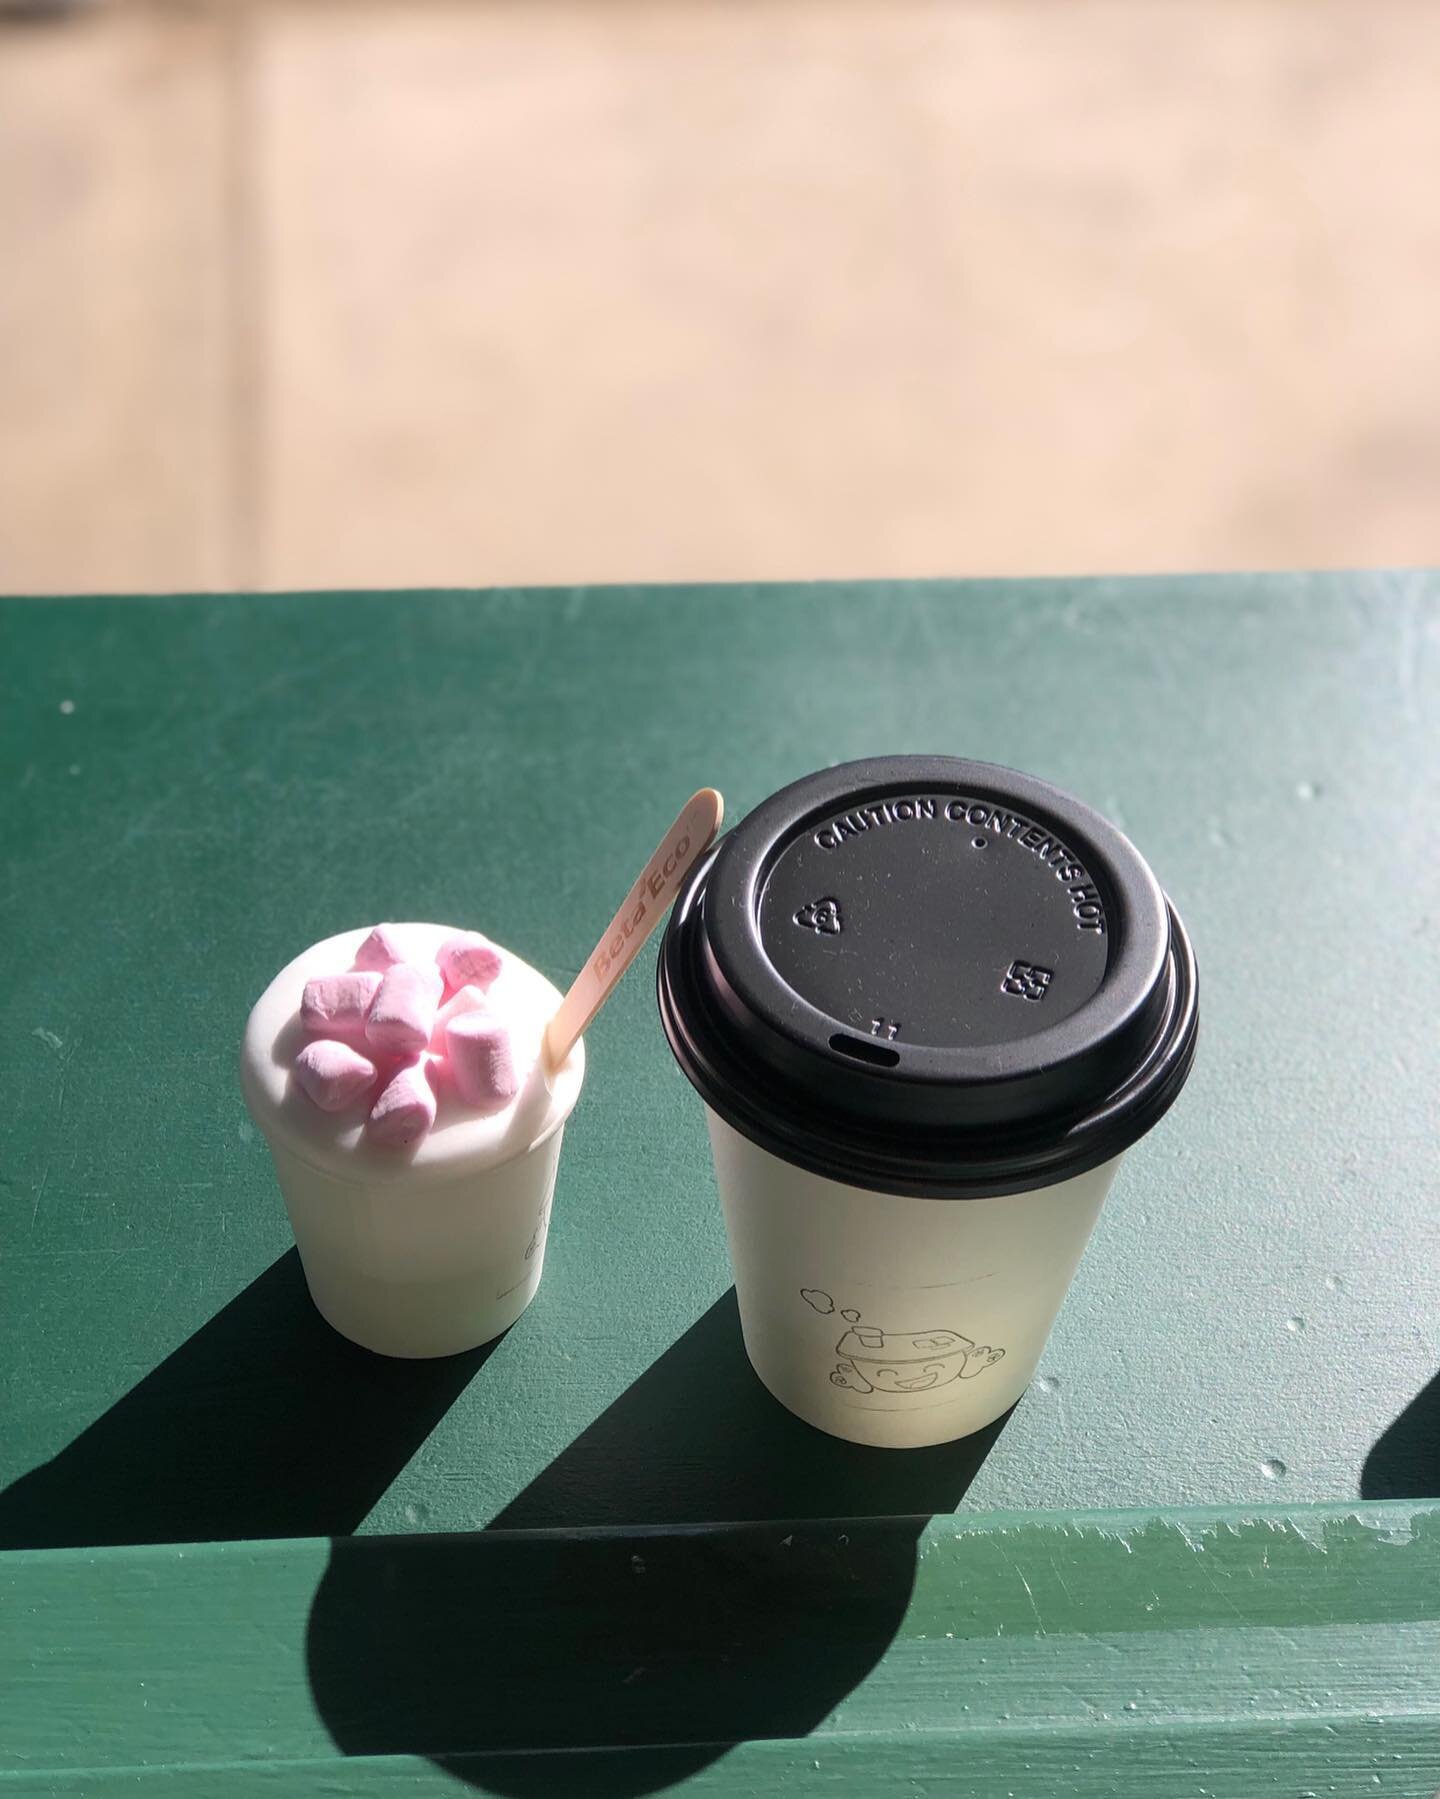 One for you. One for me. 

See you at the park tomorrow ❤️
@cubbyhousecanteen 

#cino #stronglatte #hotdate #seeyouatthepark #communitykindnessconnection #cubbyhousecanteen